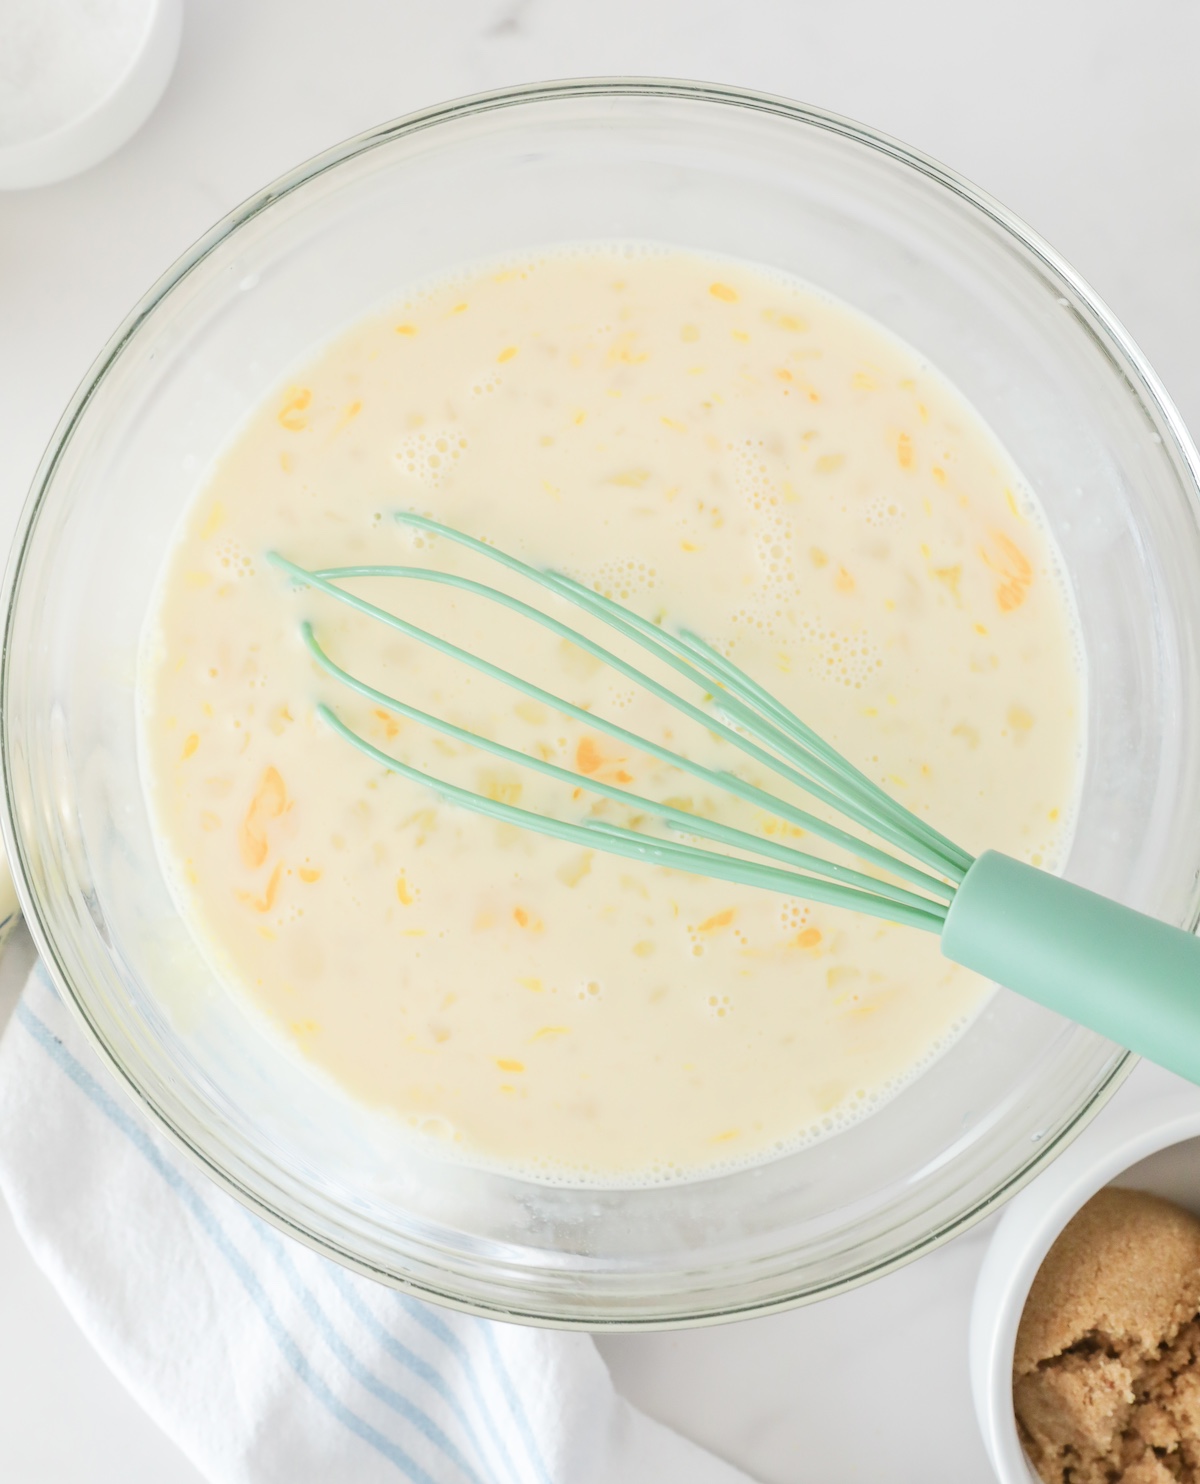 mix eggs, milk, half and half, vanilla extract, and sugar in a bowl